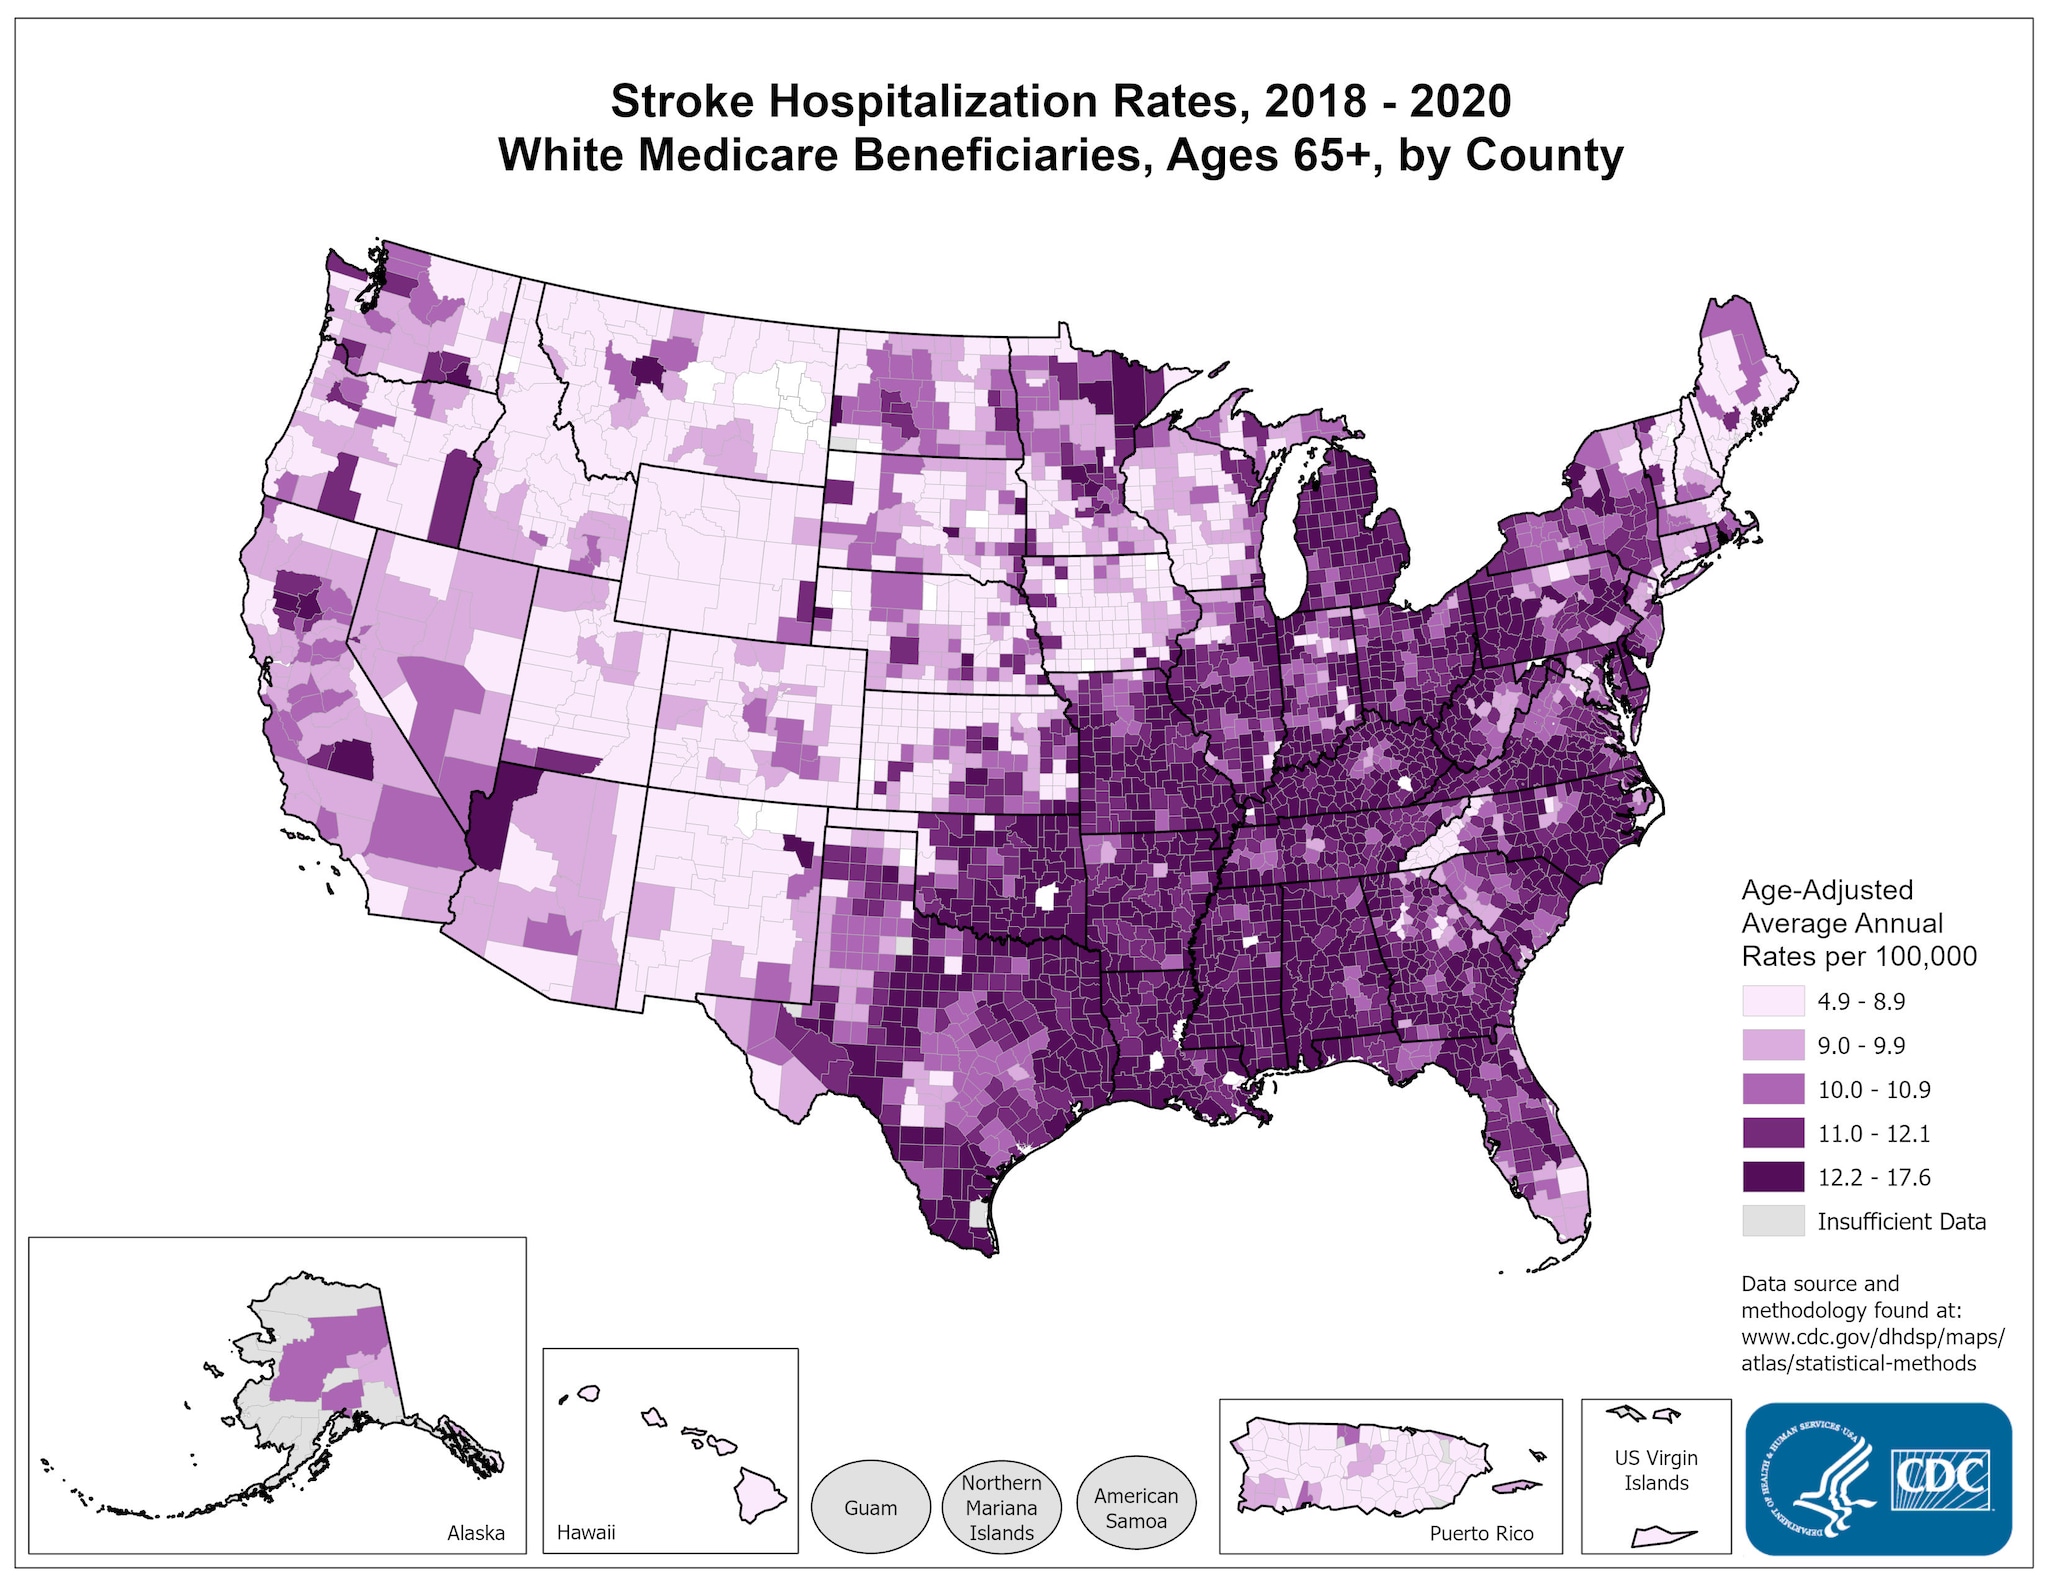 Stroke Hospitalization Rates for 2018 through 2020 for Whites Aged 65 Years and Older by County